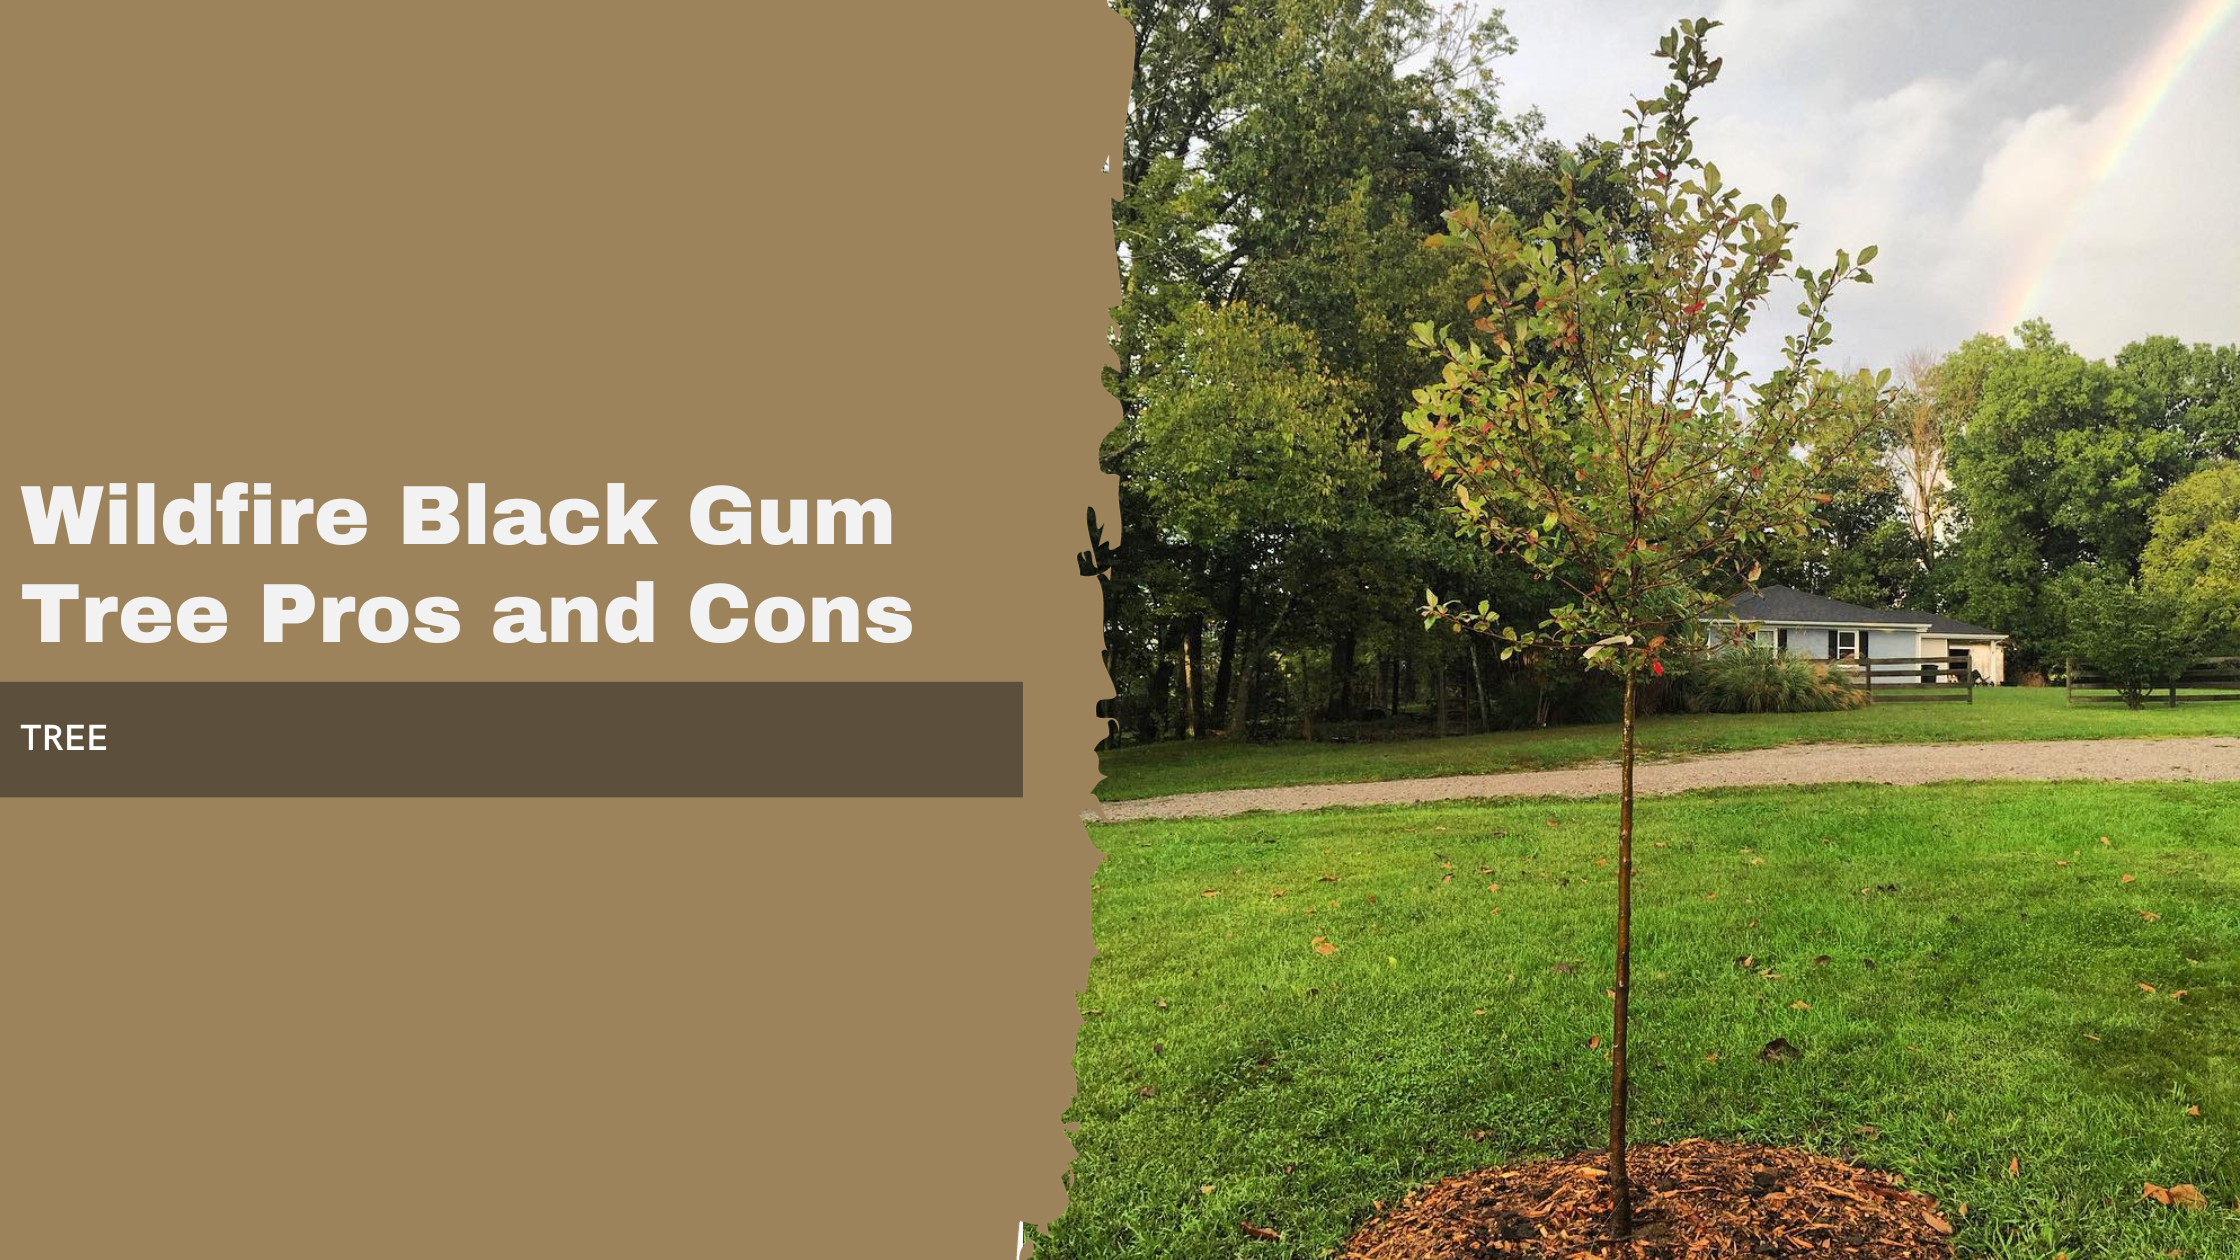 Wildfire Black Gum Tree Pros and Cons